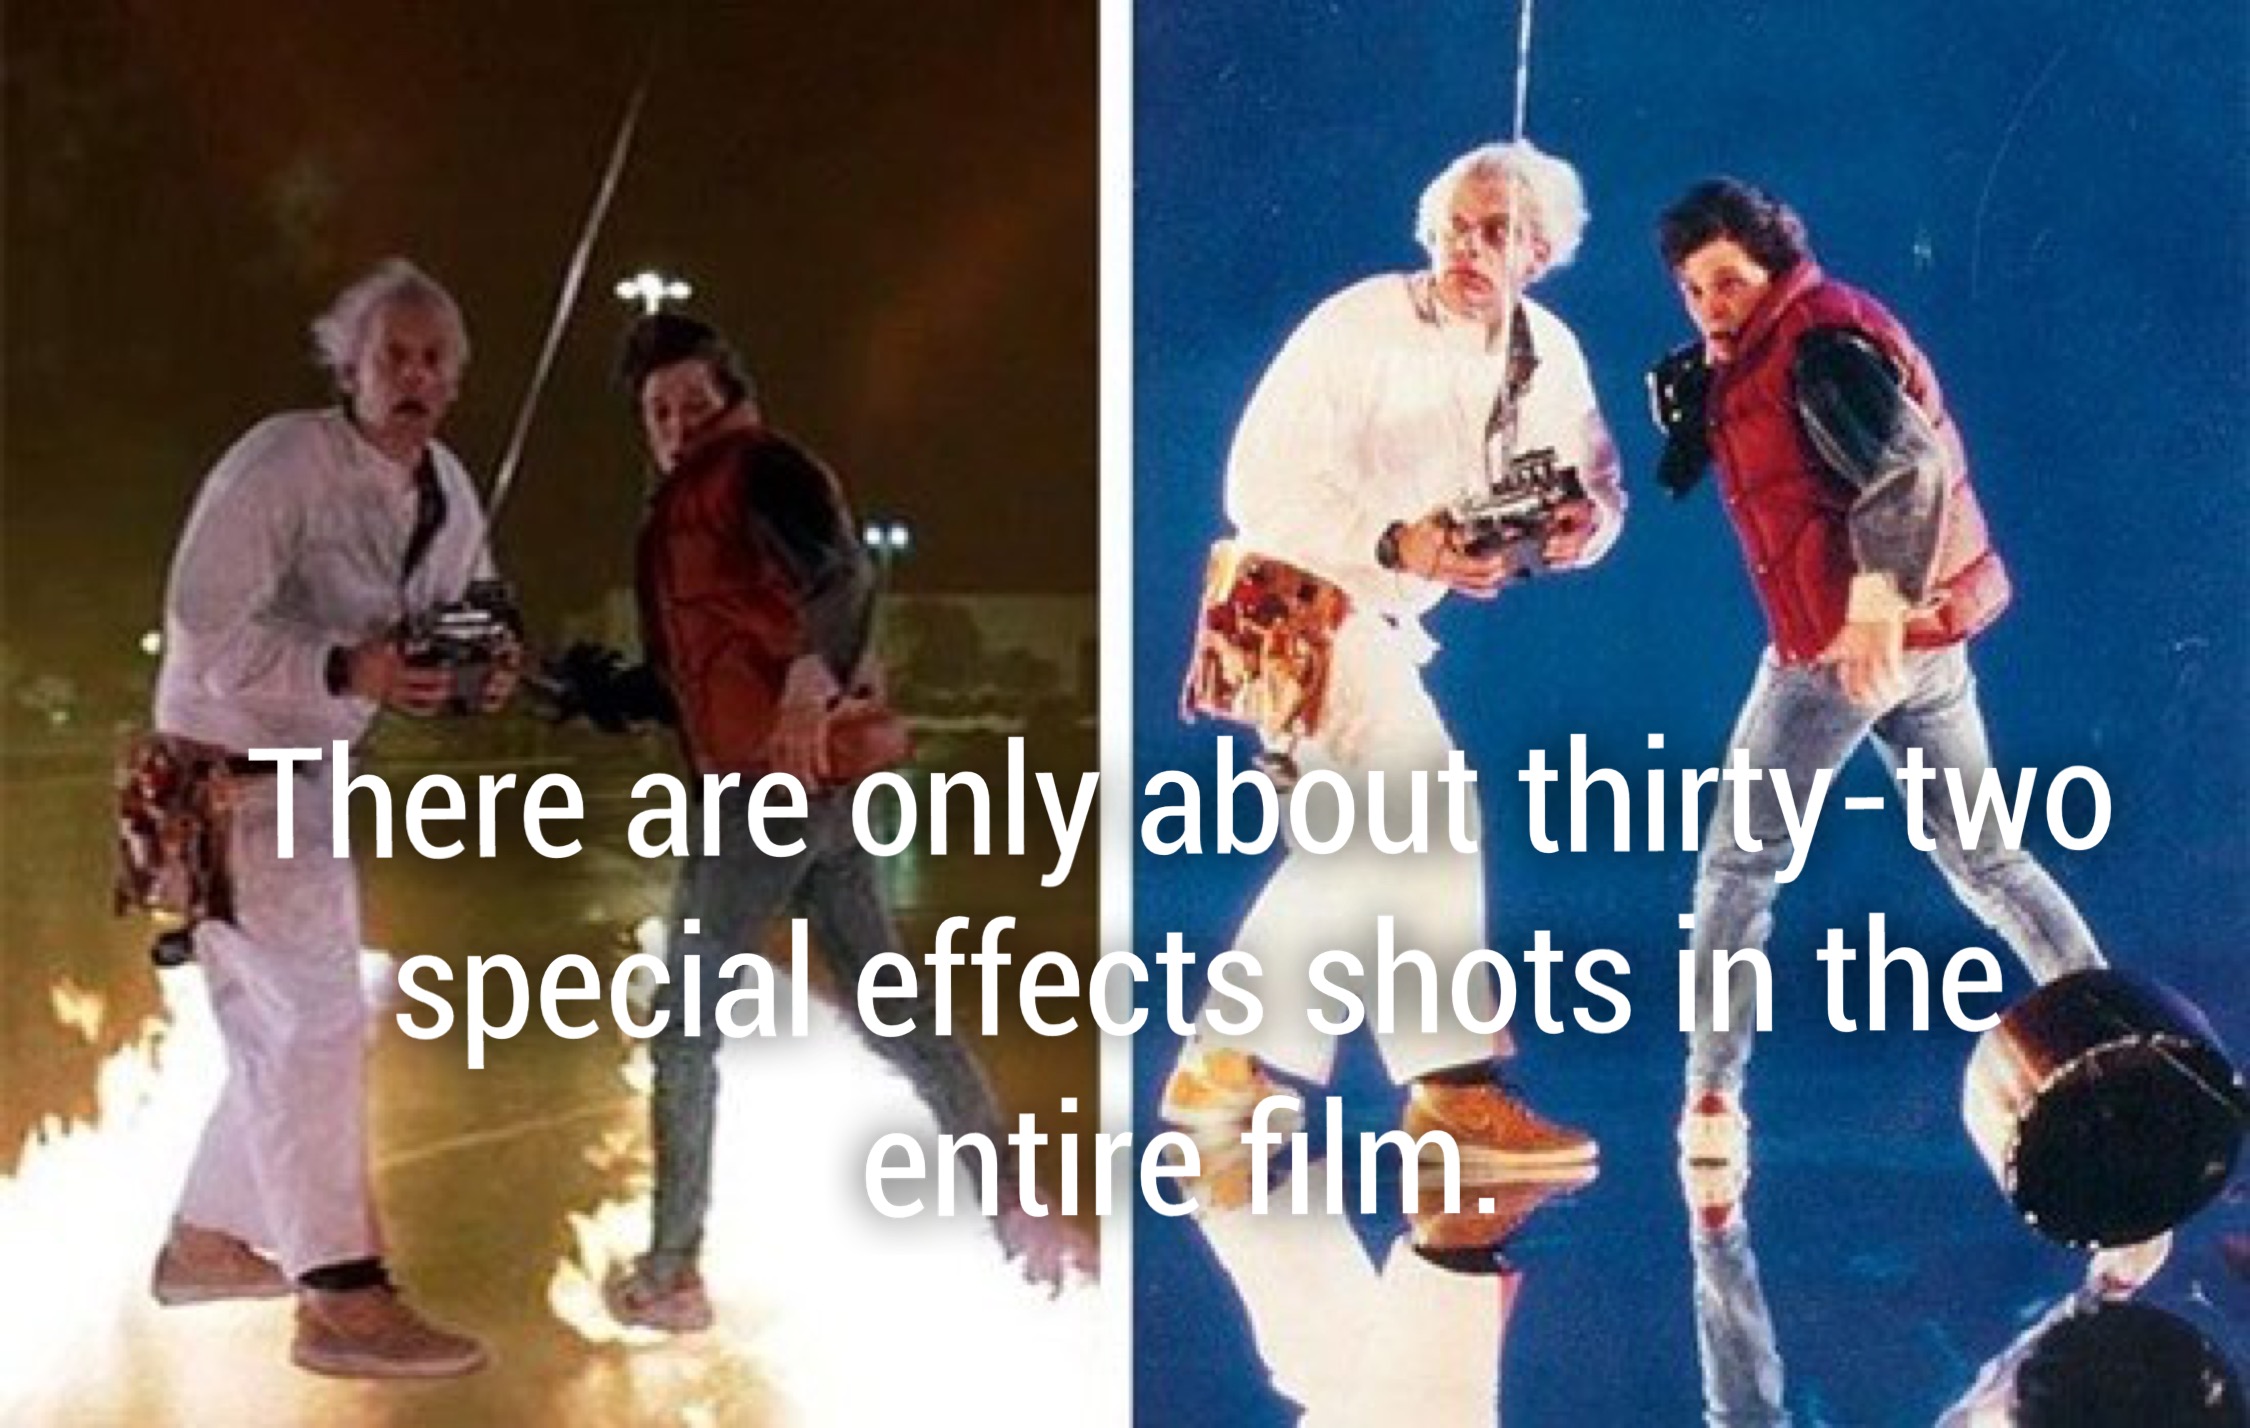 back to the future 1 behind scene - There are only about thirtytwo especial effects shots in the entite film.